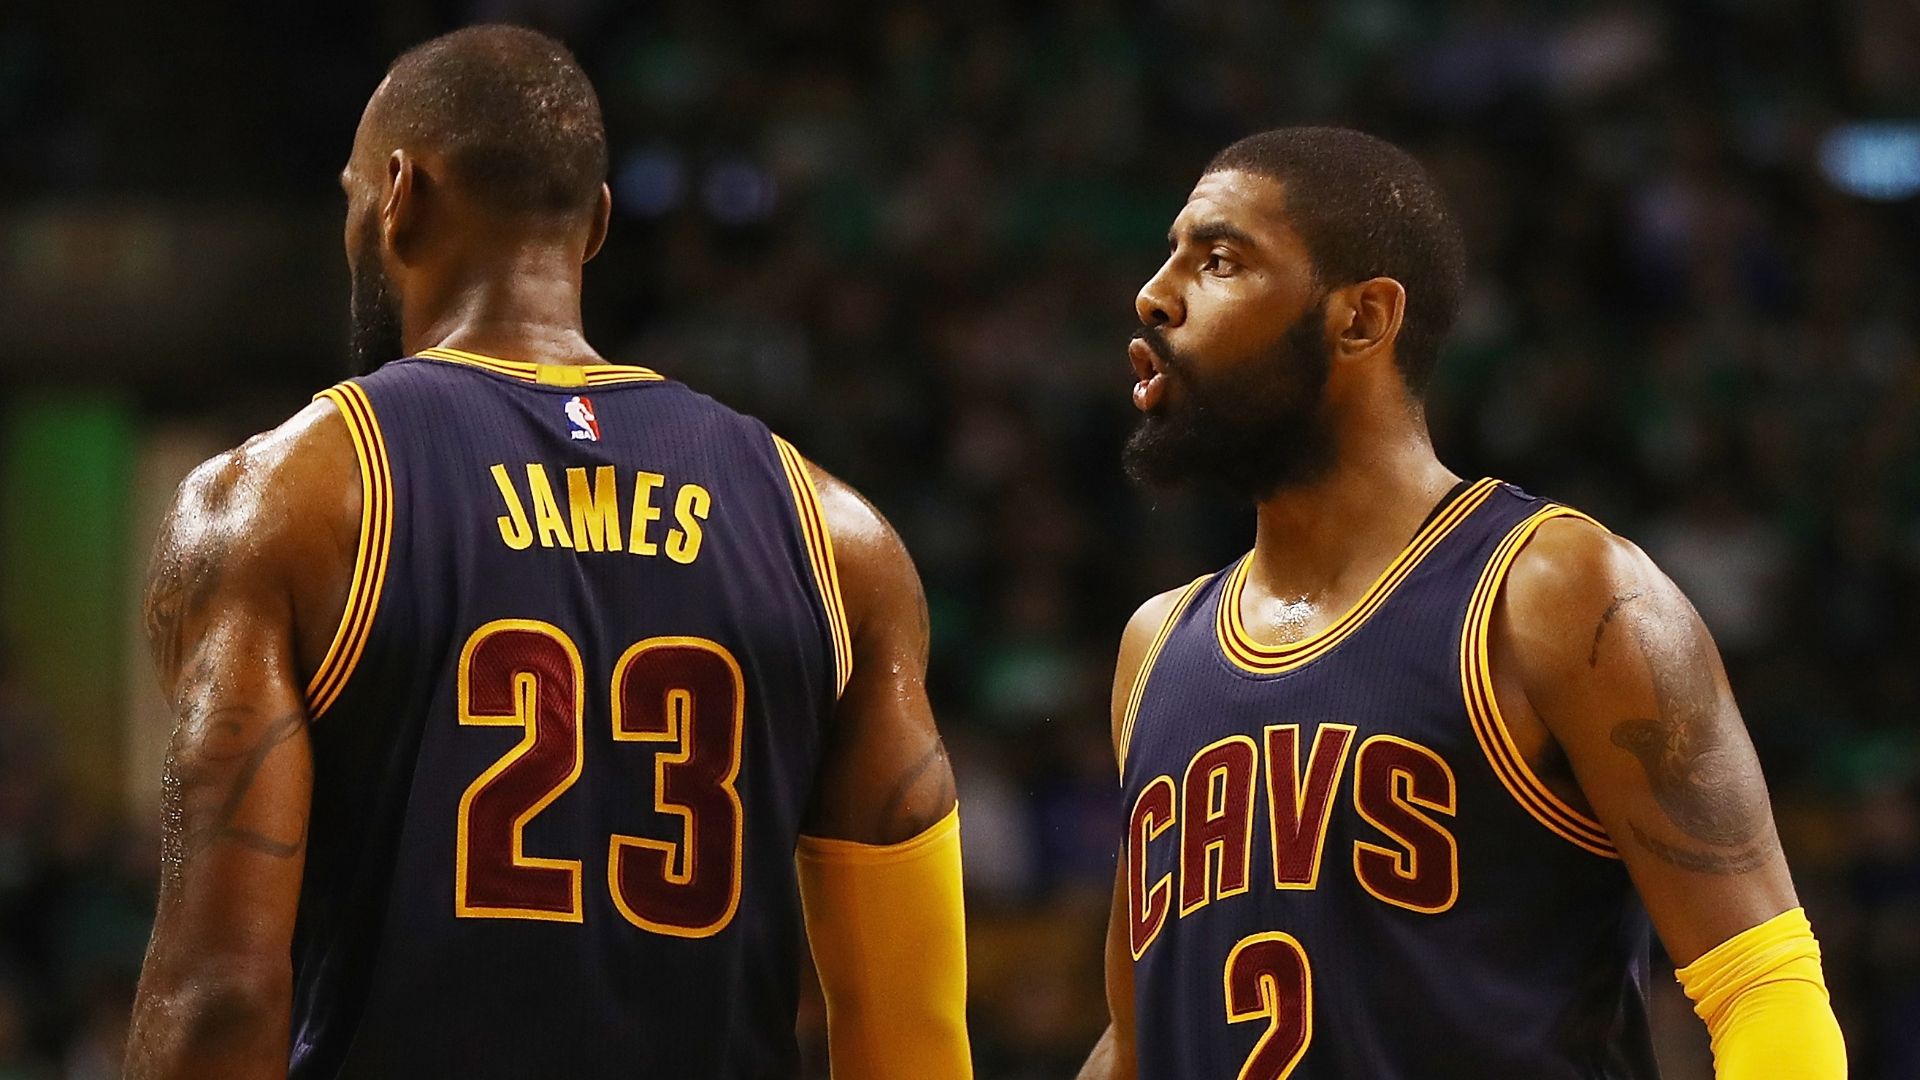 Irving's camp blaming LeBron for leaked news - ESPN Video1920 x 1080